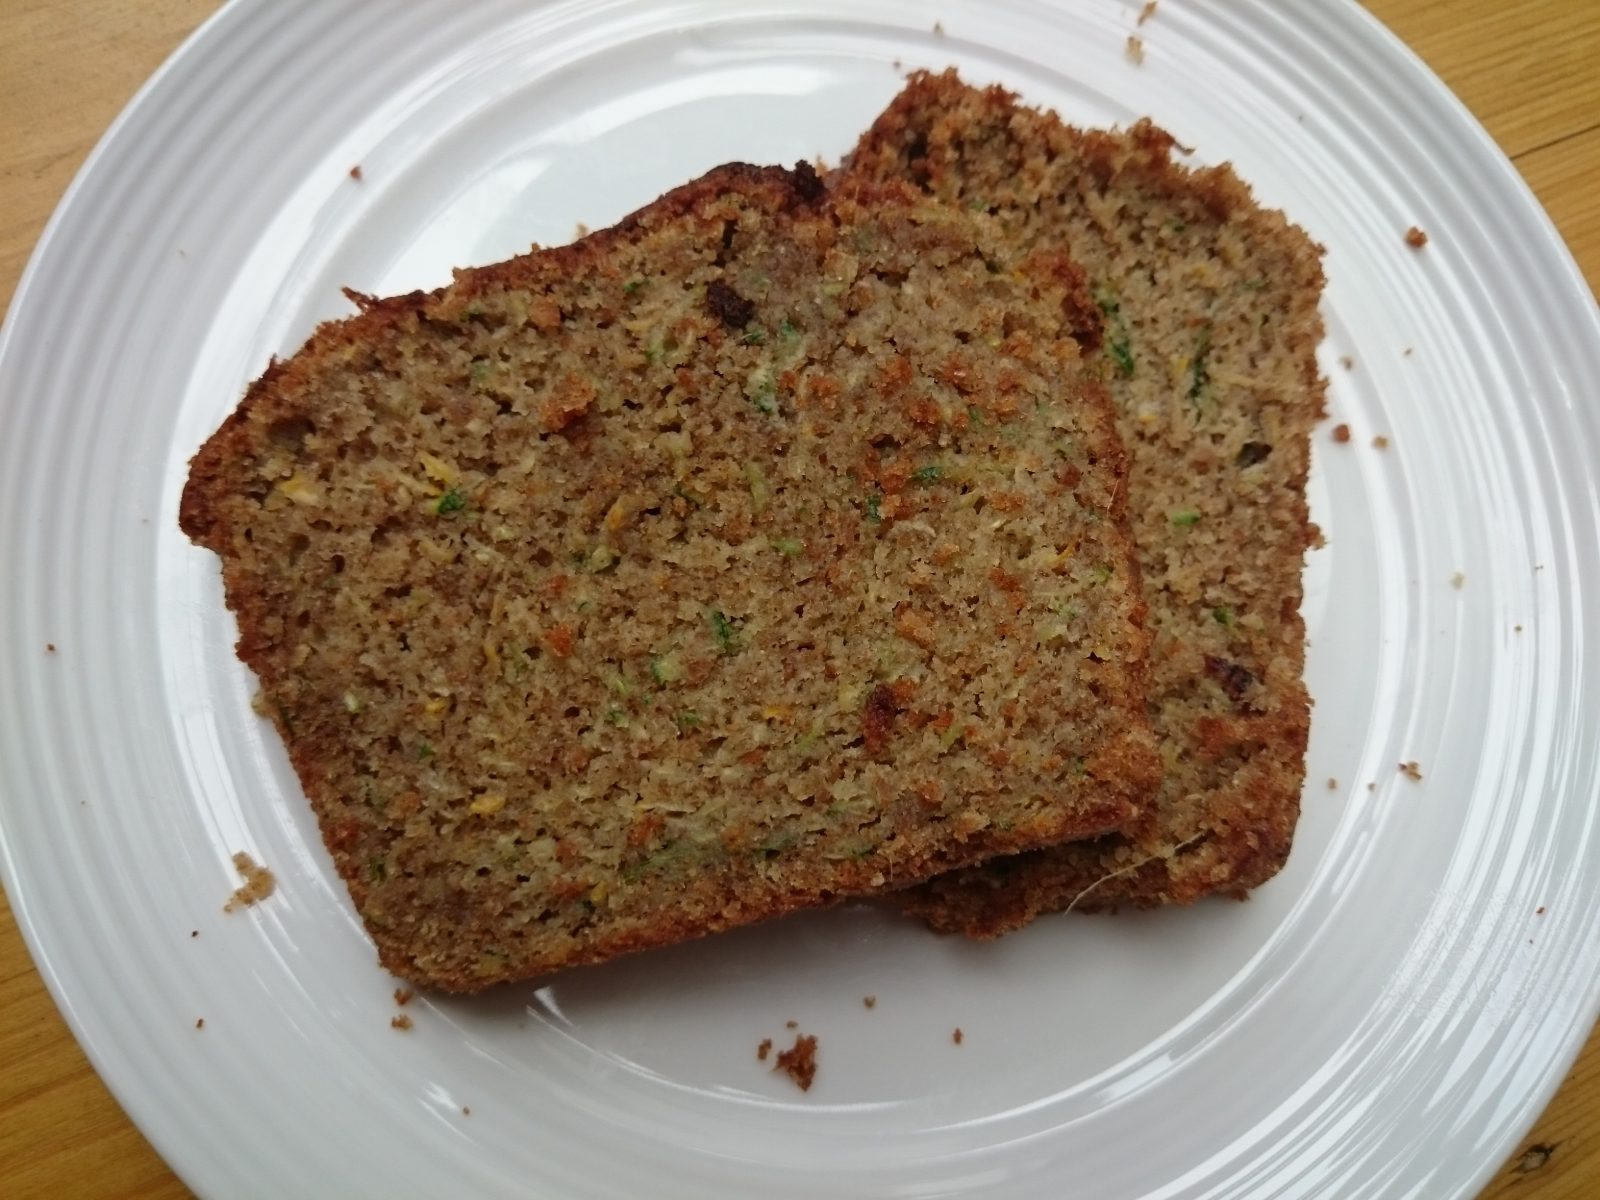 zucchini-courgette-oliveoil-bread-camelcsa-010816